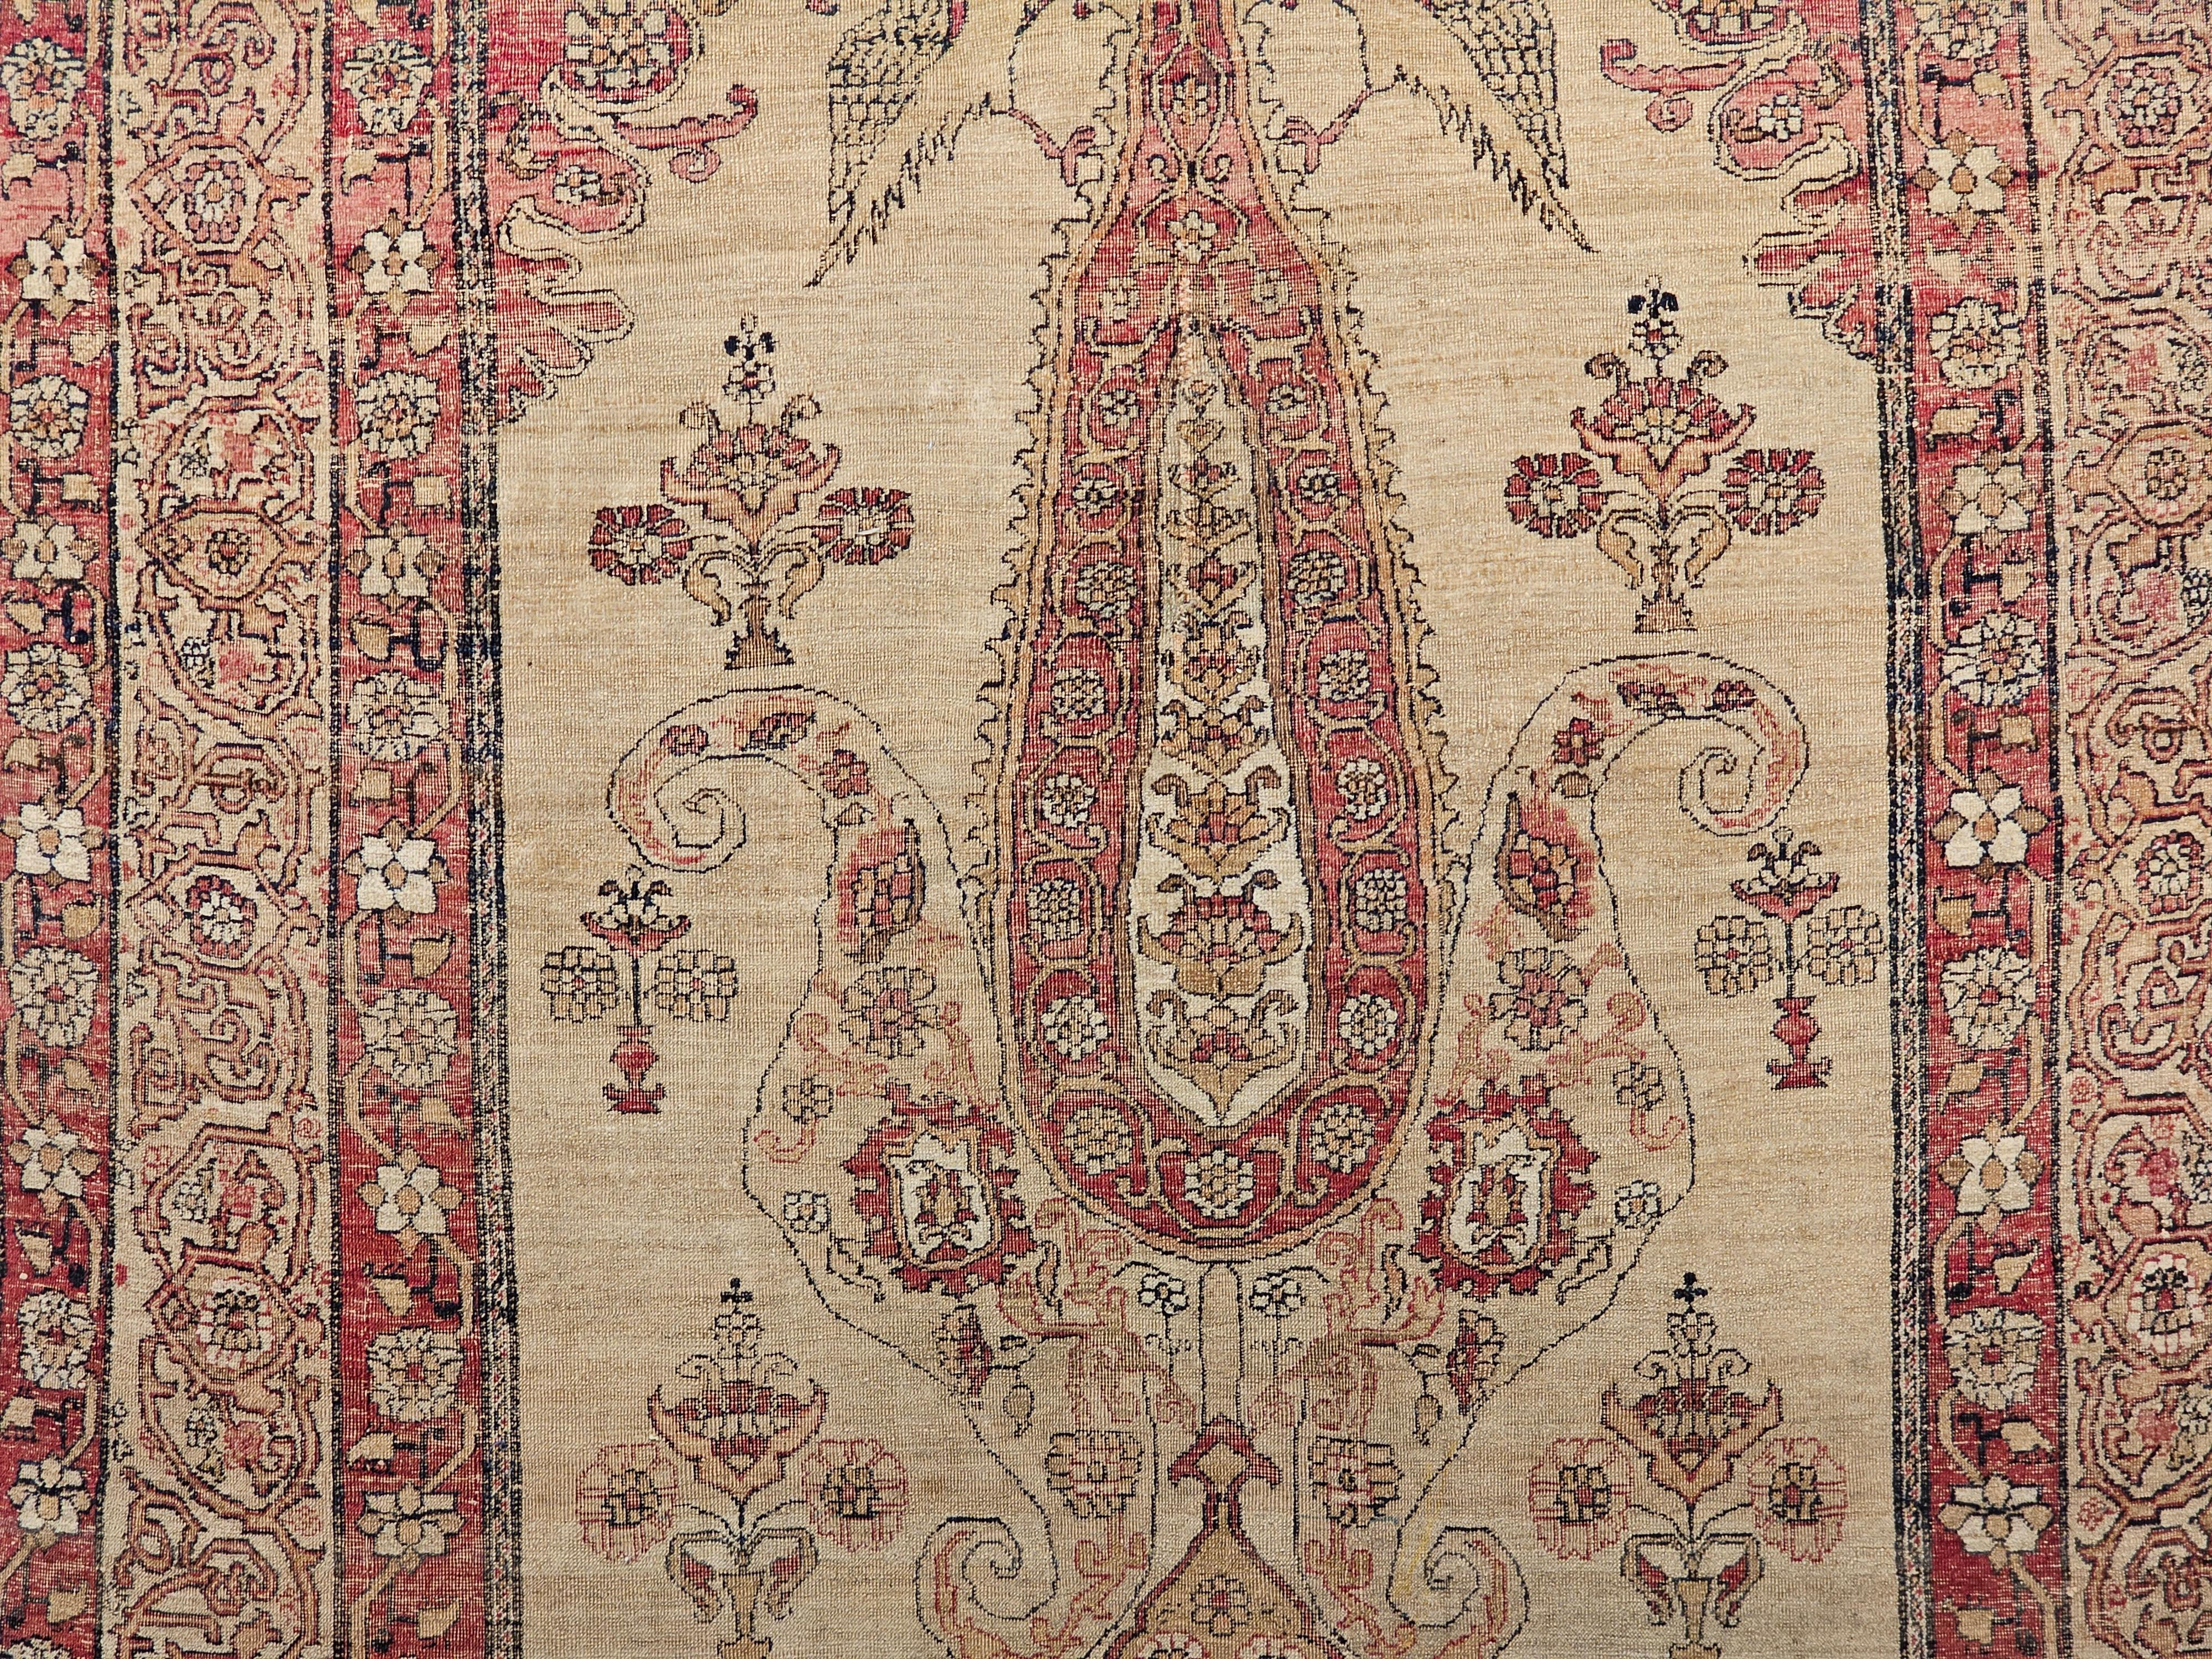 Wool 19th Century Persian Kerman Lavar Pictorial “Tree of Life” Rug in Camel, Red For Sale